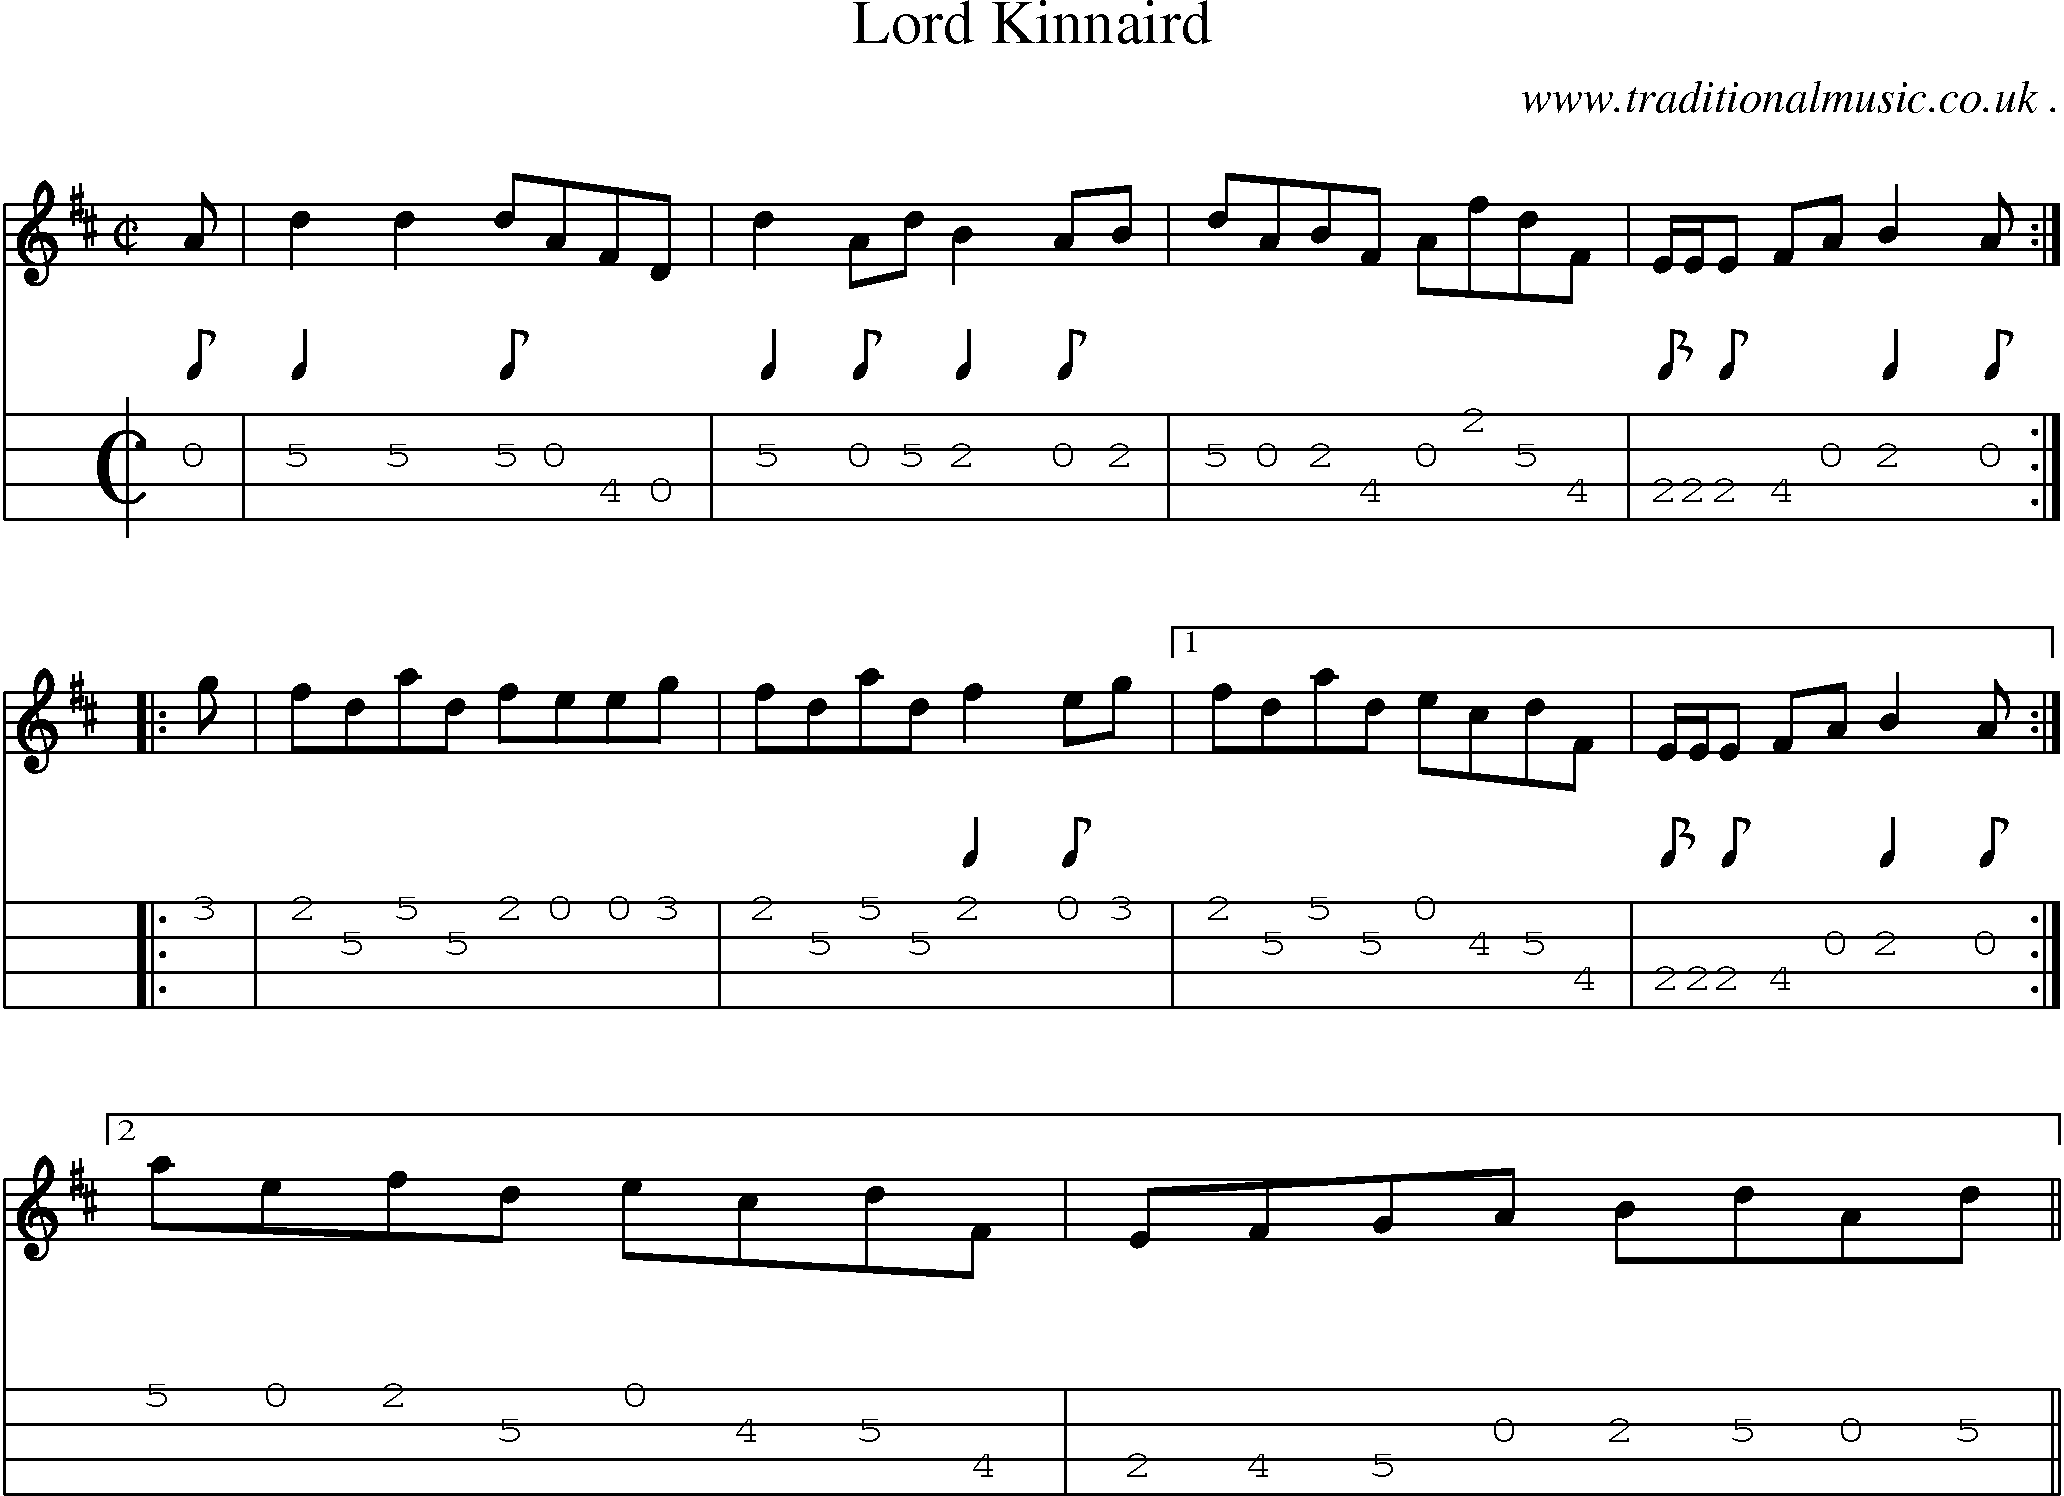 Sheet-music  score, Chords and Mandolin Tabs for Lord Kinnaird